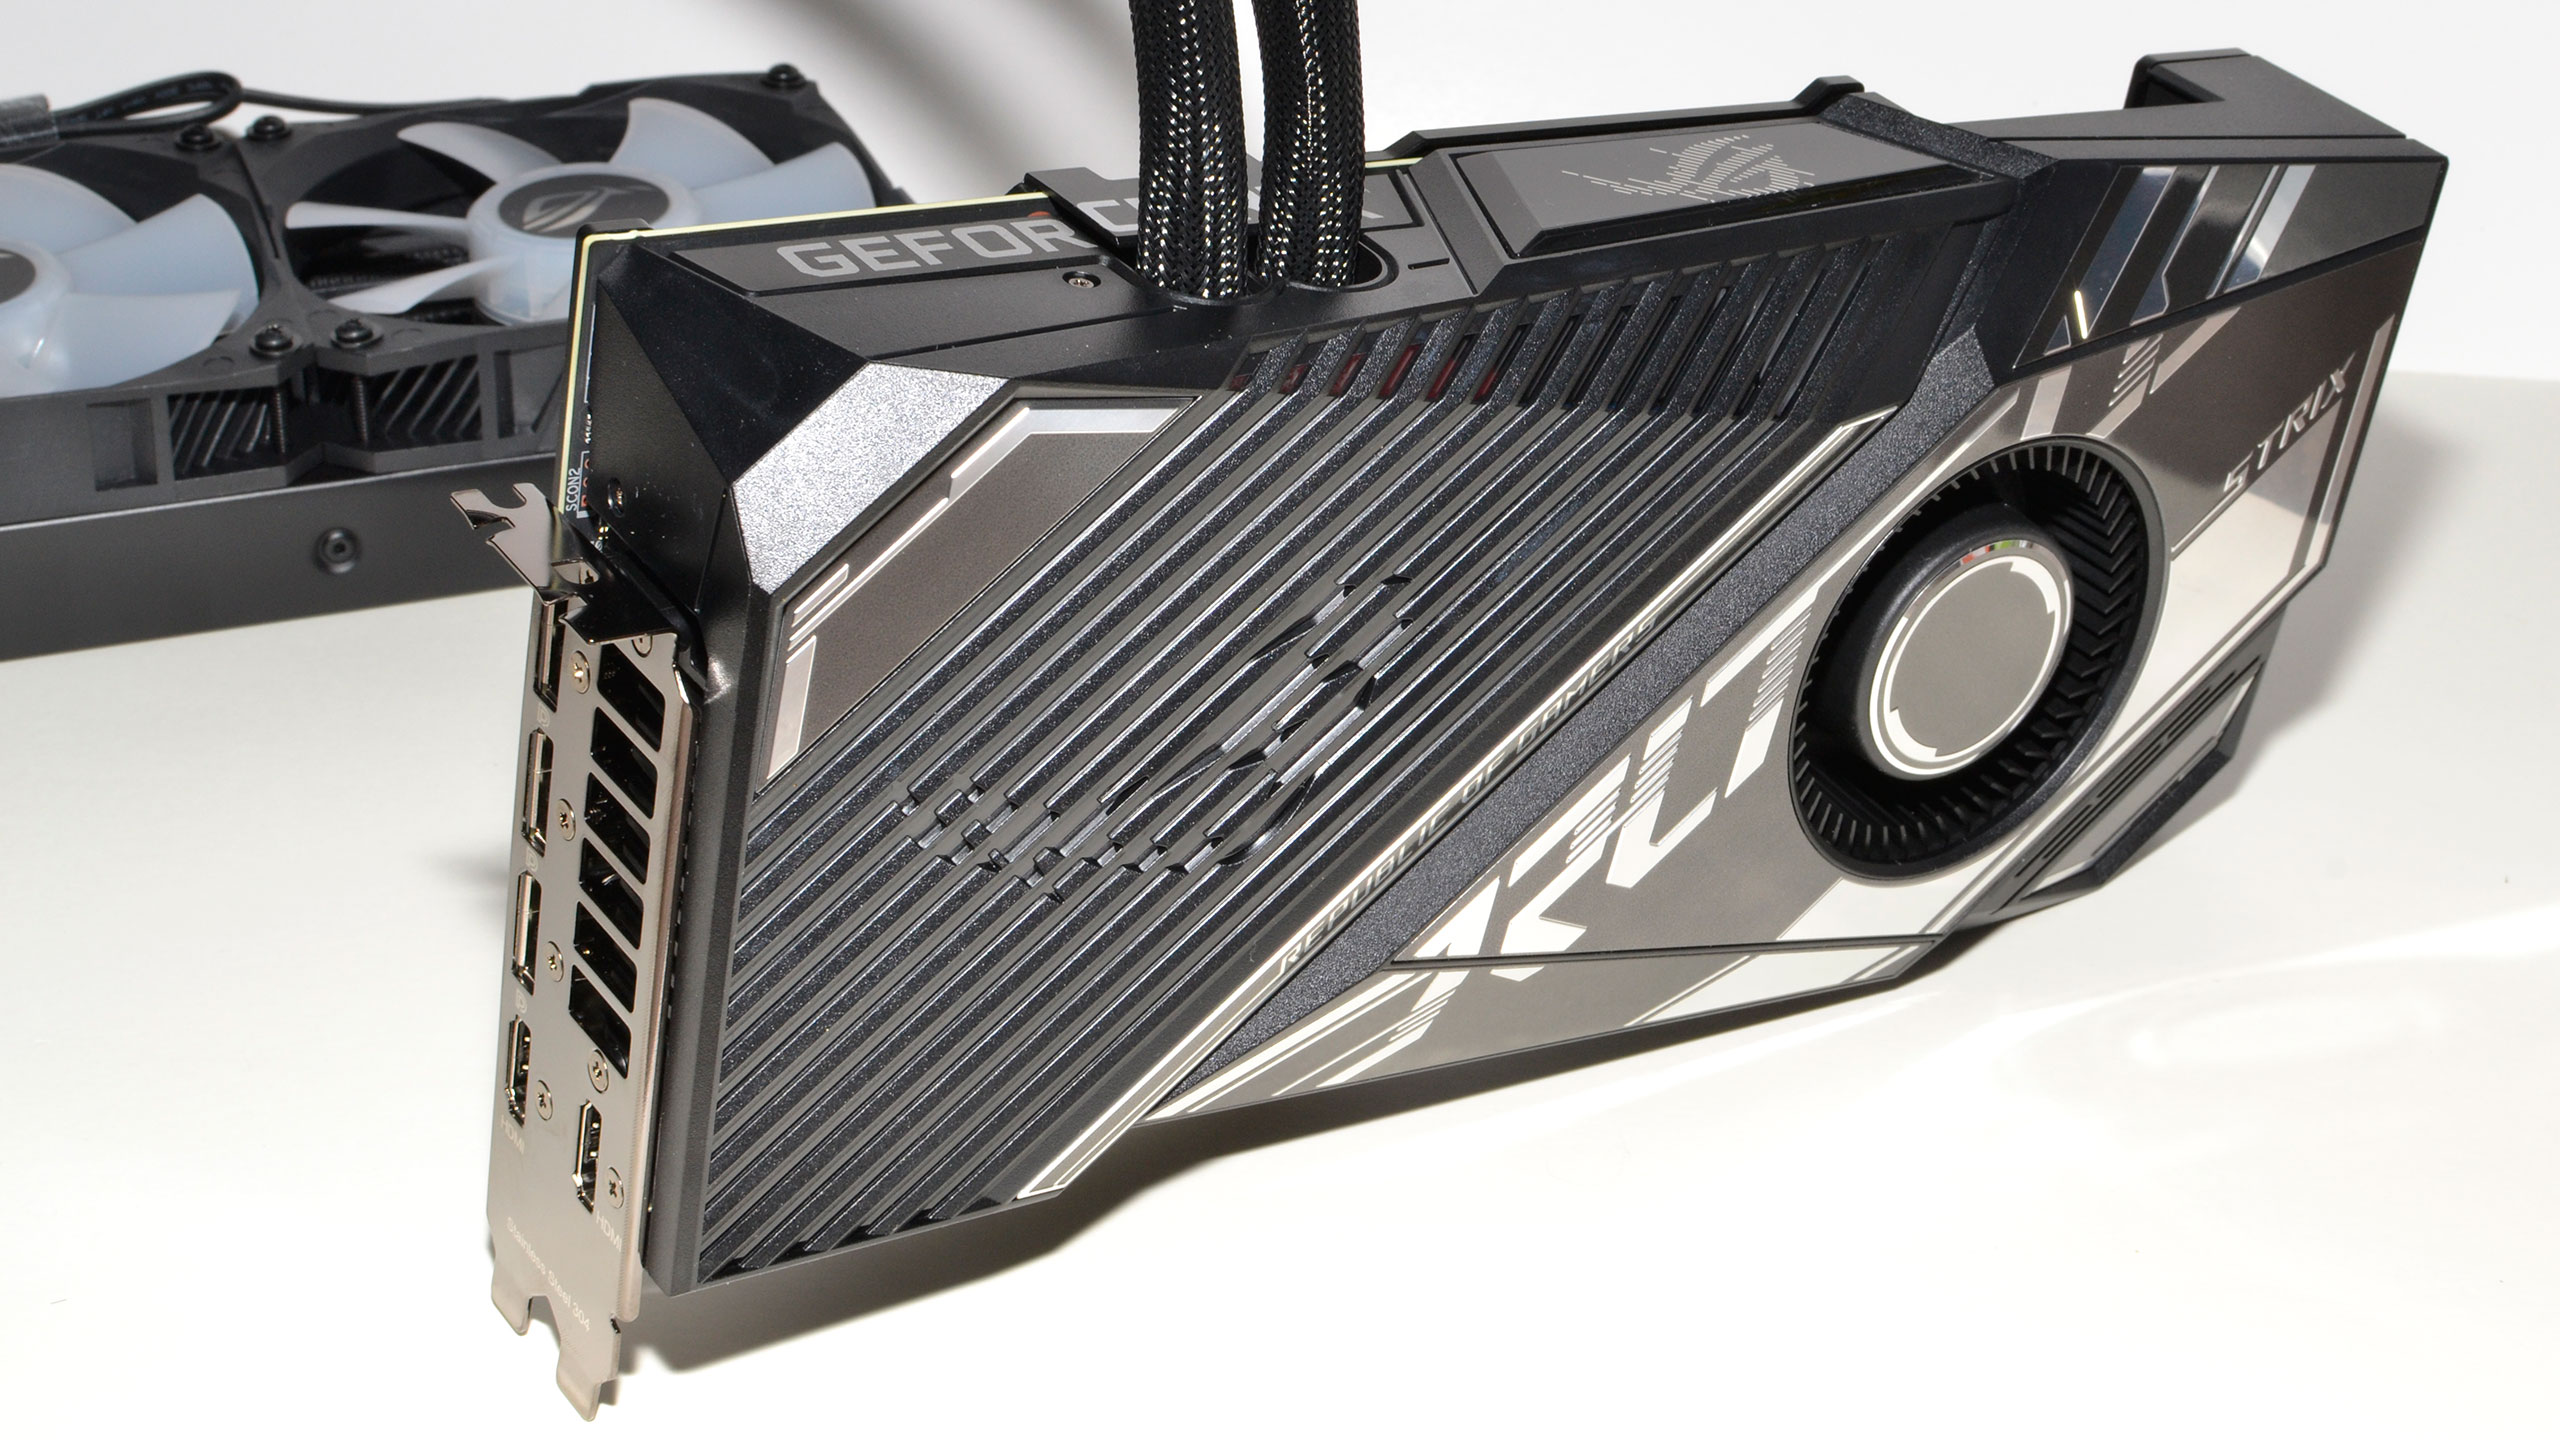 Asus Rog Strix Lc Geforce Rtx 3080 Ti Review The Fastest Card We Ve